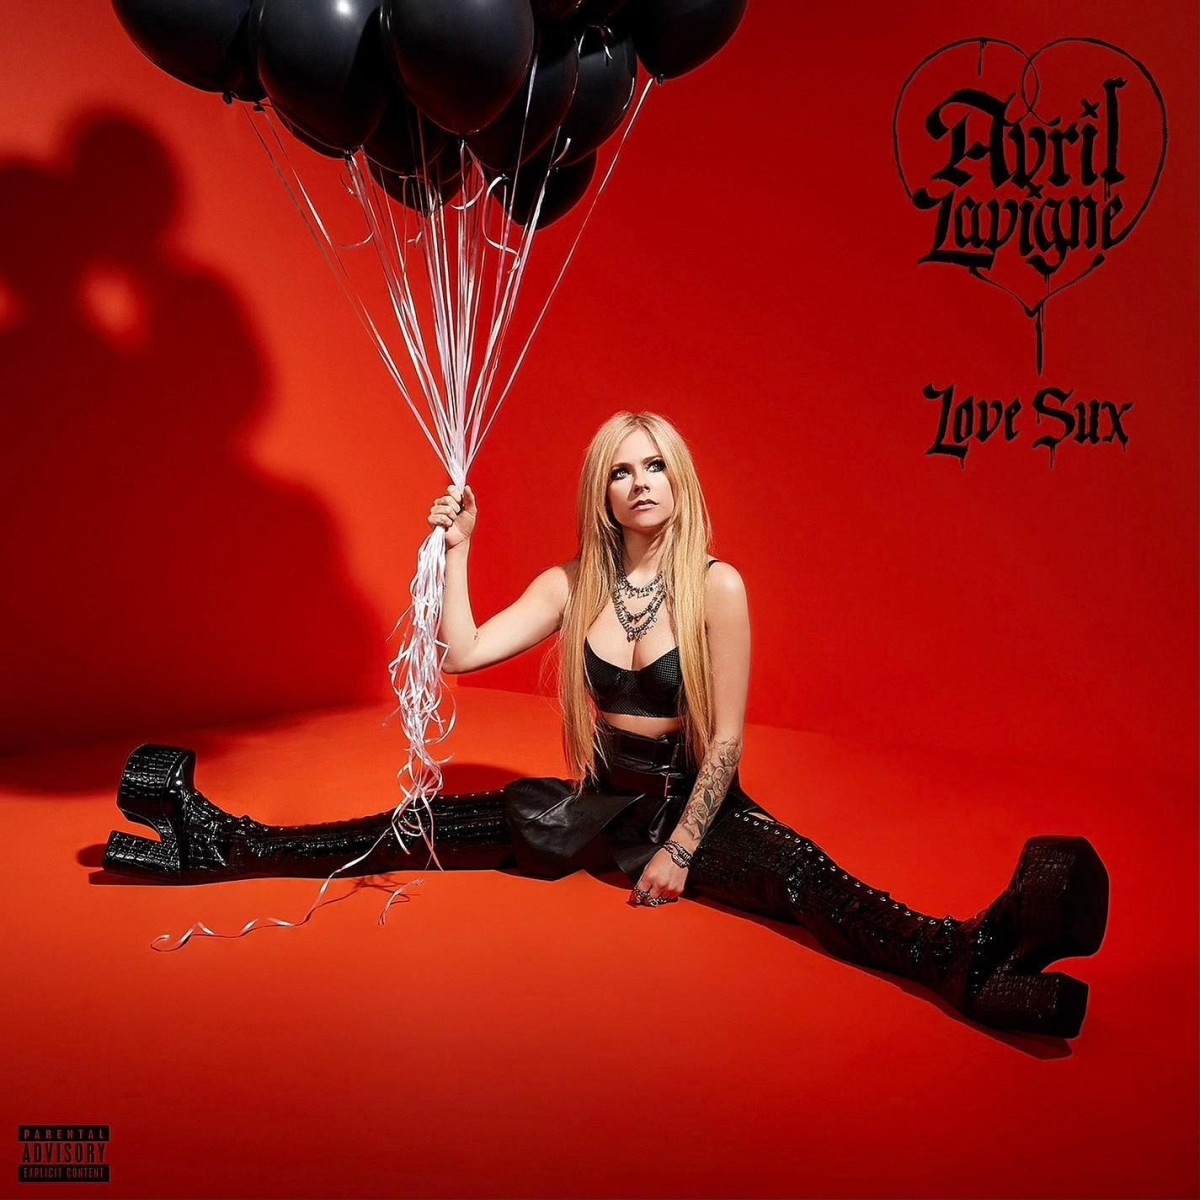 Review: Love Sux by Avril Lavigne